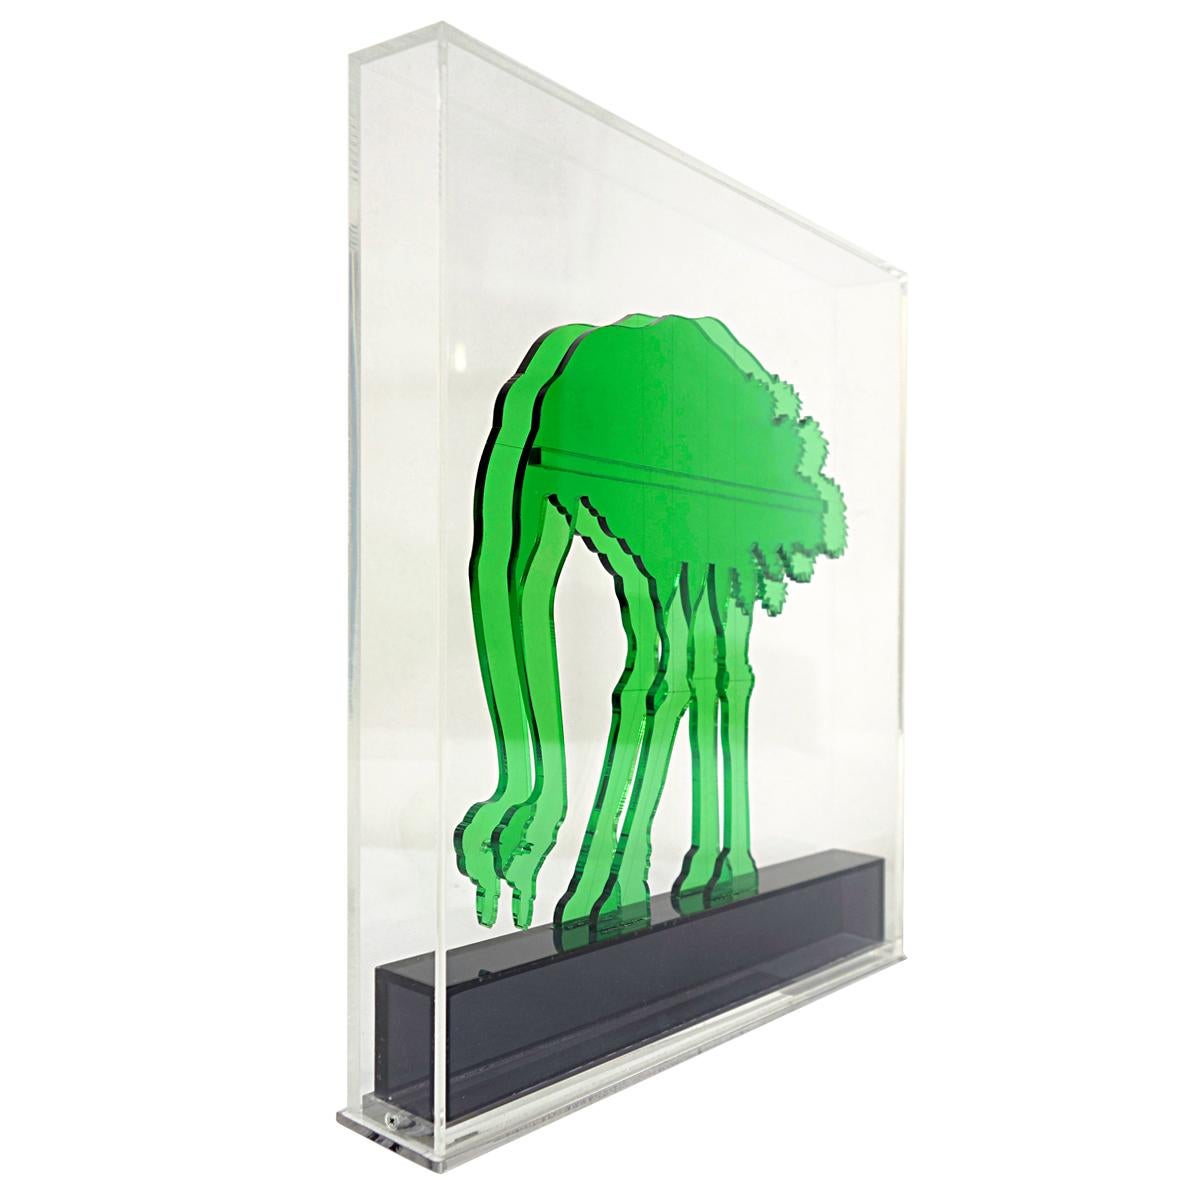 This slightly psychedelic green ostrich was made of topnotch quality plexiglass and sits in a colorless plexiglass casing. By figuring the ostrich twice - the first right before the other - a spectacular effect has been realized. They seem to be of